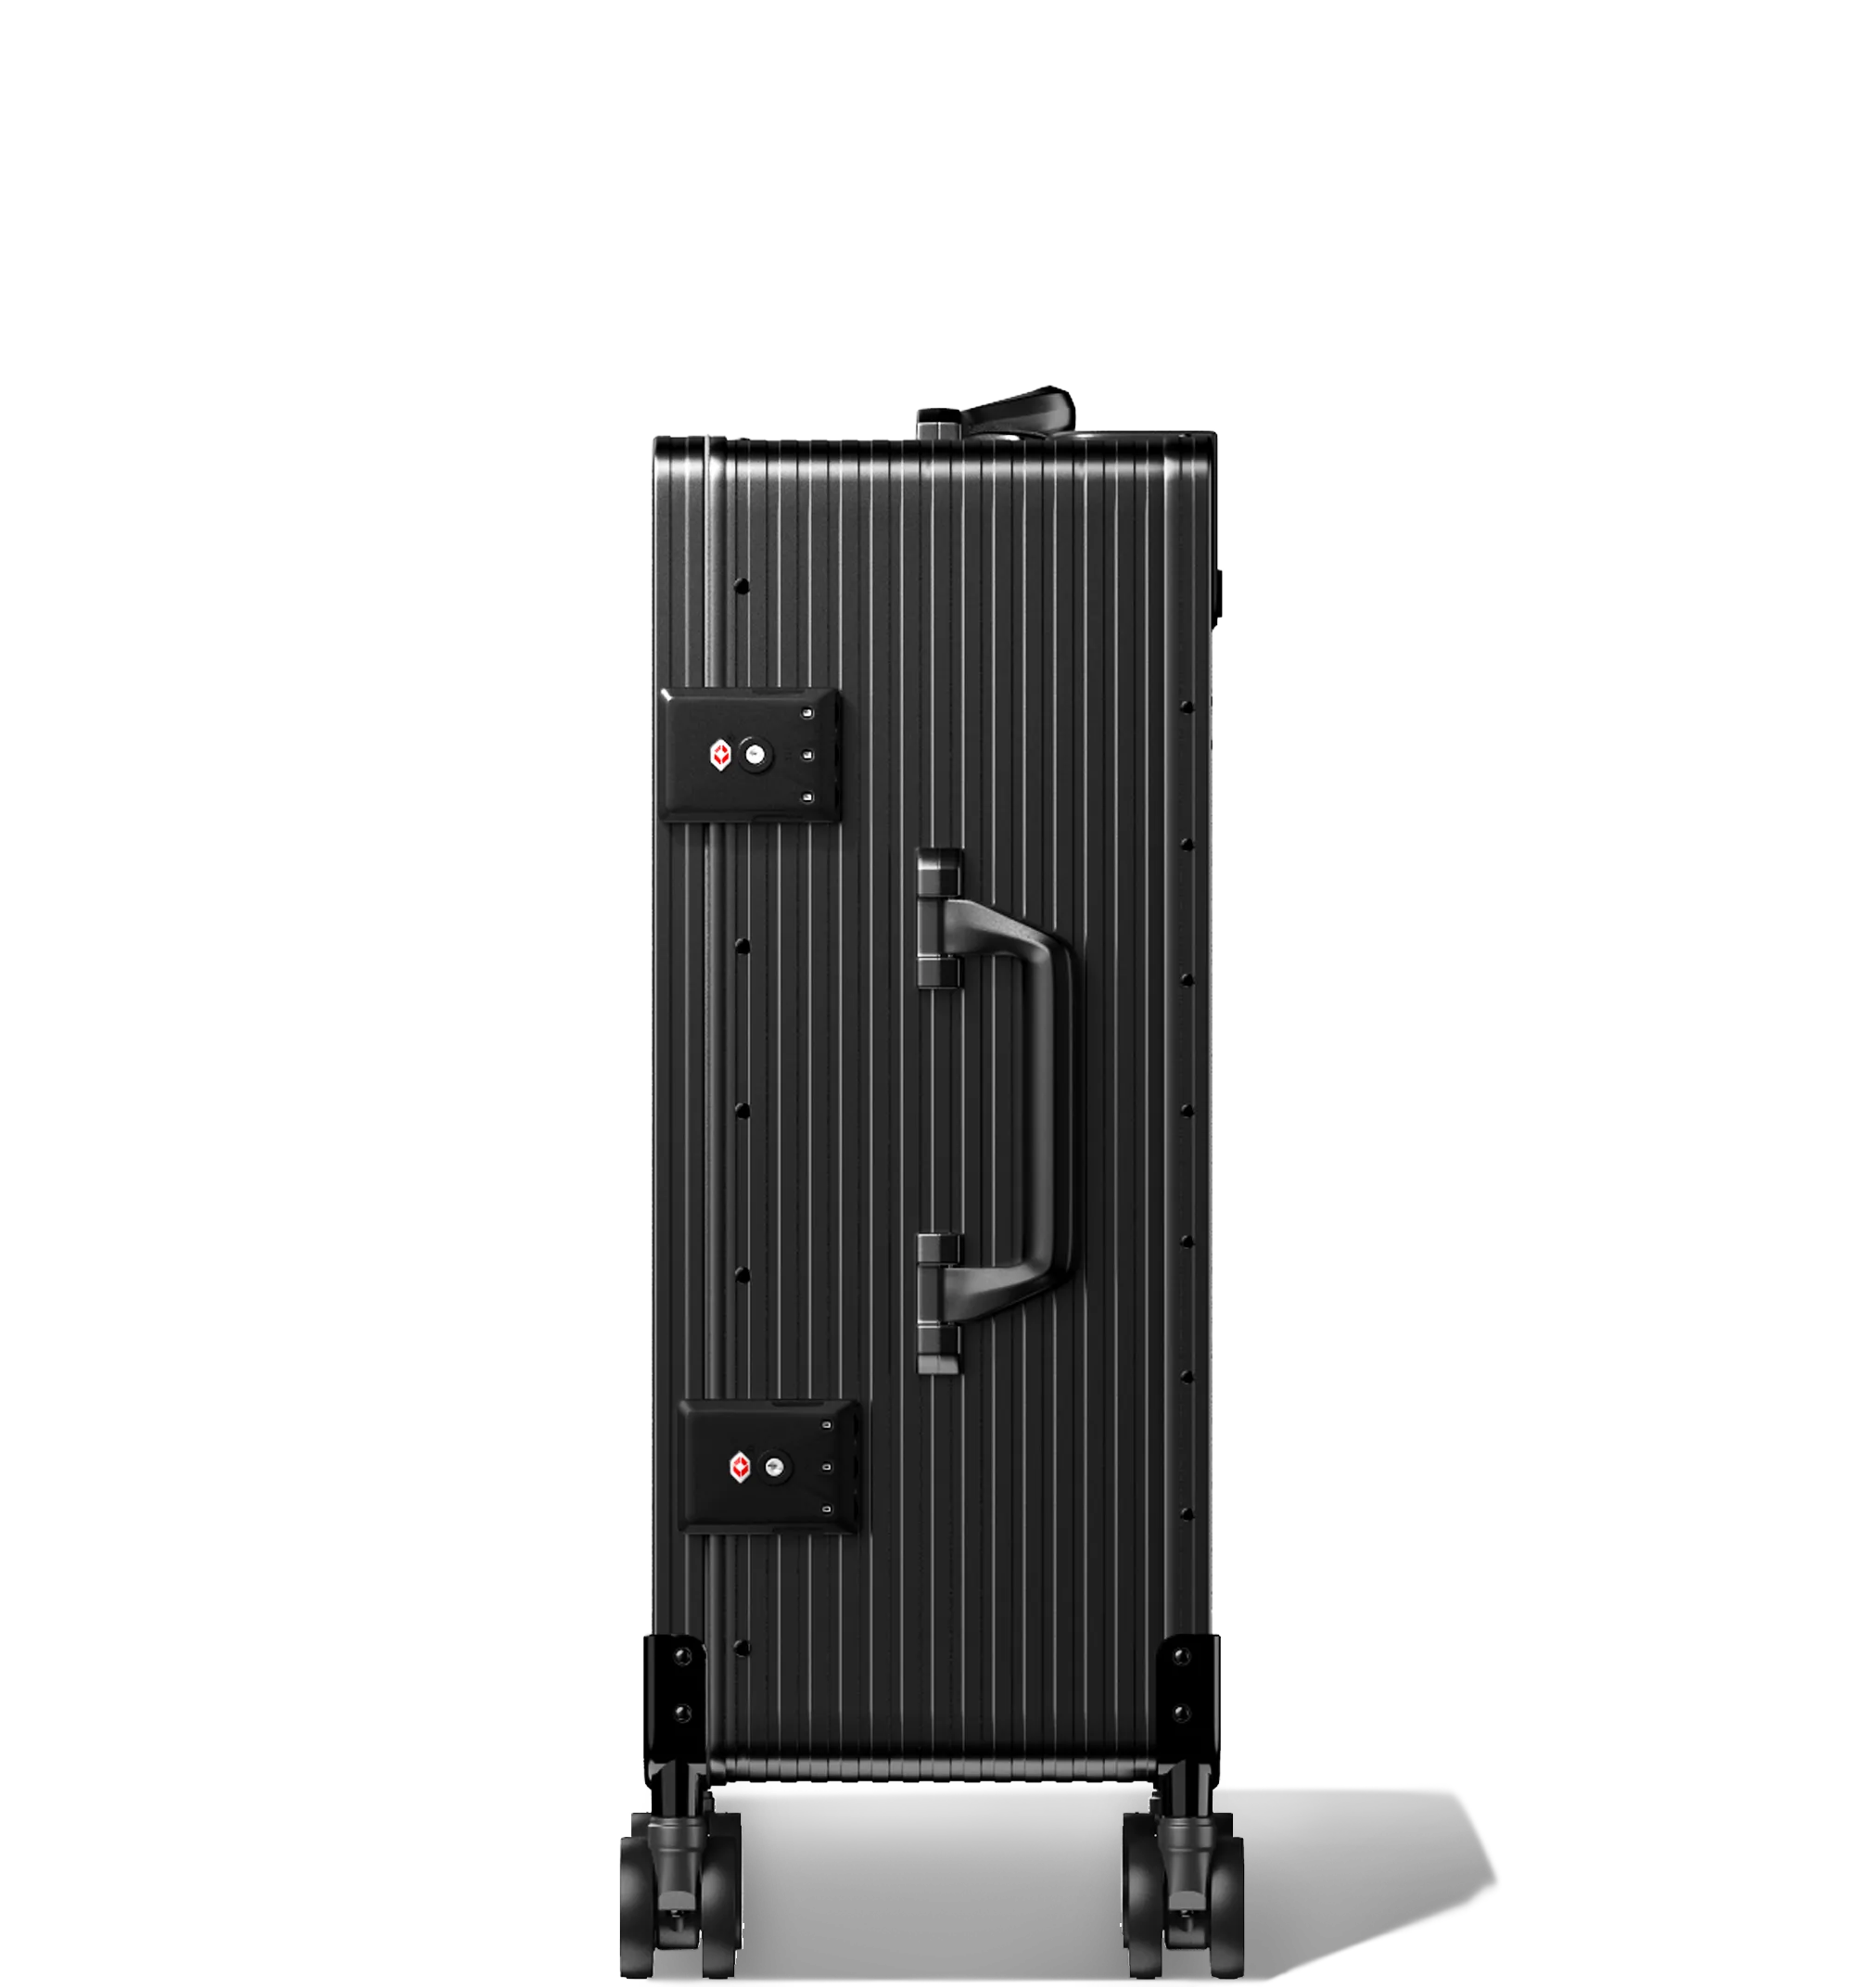 A black Cabin In 56/20 hard-shell aluminium Luggage standing upright with ribbed texture, side and top carry handles, two TSA-approved combination locks, and four spinning wheels, against a white background.